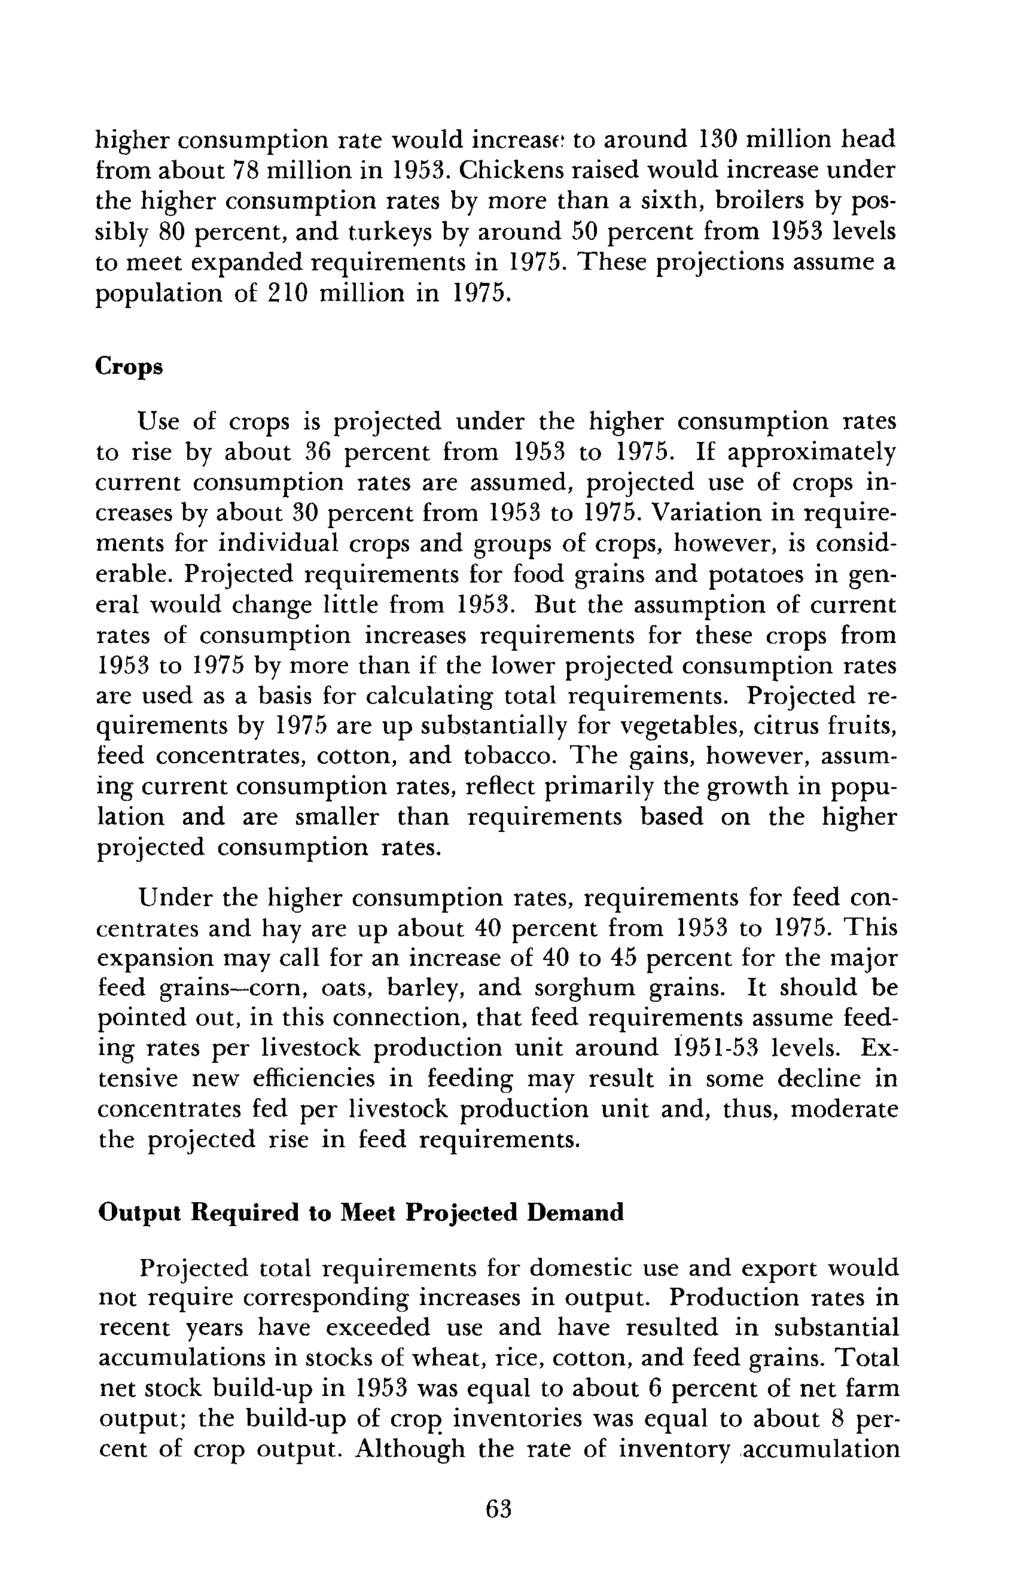 higher consumption rate would increase to around 130 million head from about 78 million in 1953.